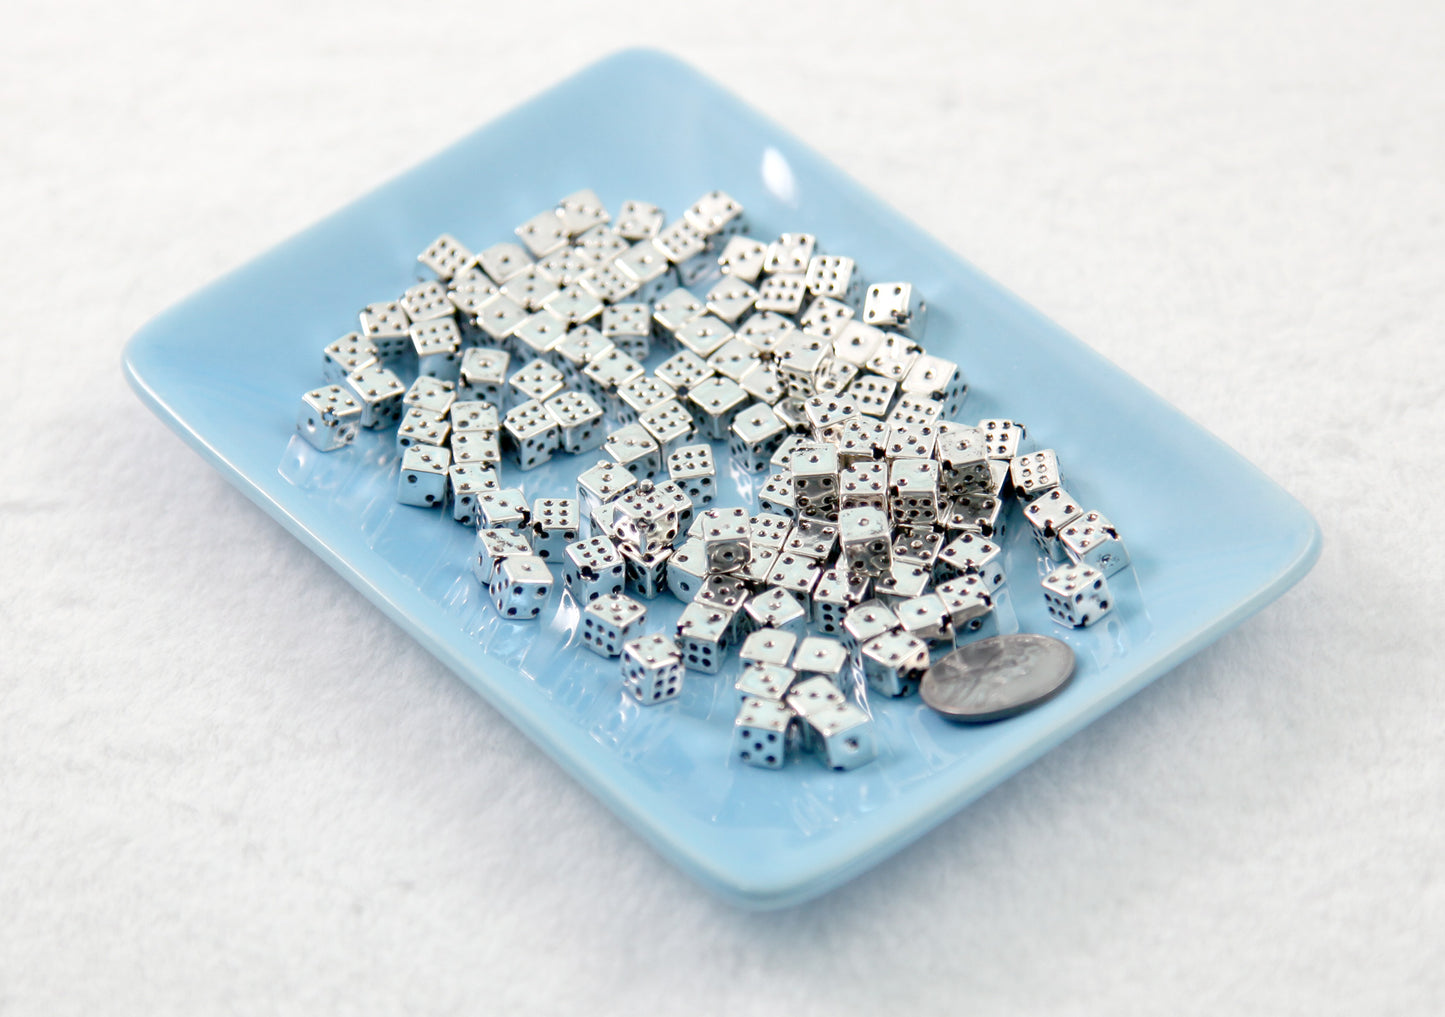 Tiny Dice Beads - 6mm Electroplated Silver Color Dice Diagonal Hole Plastic Beads - 120 pc set